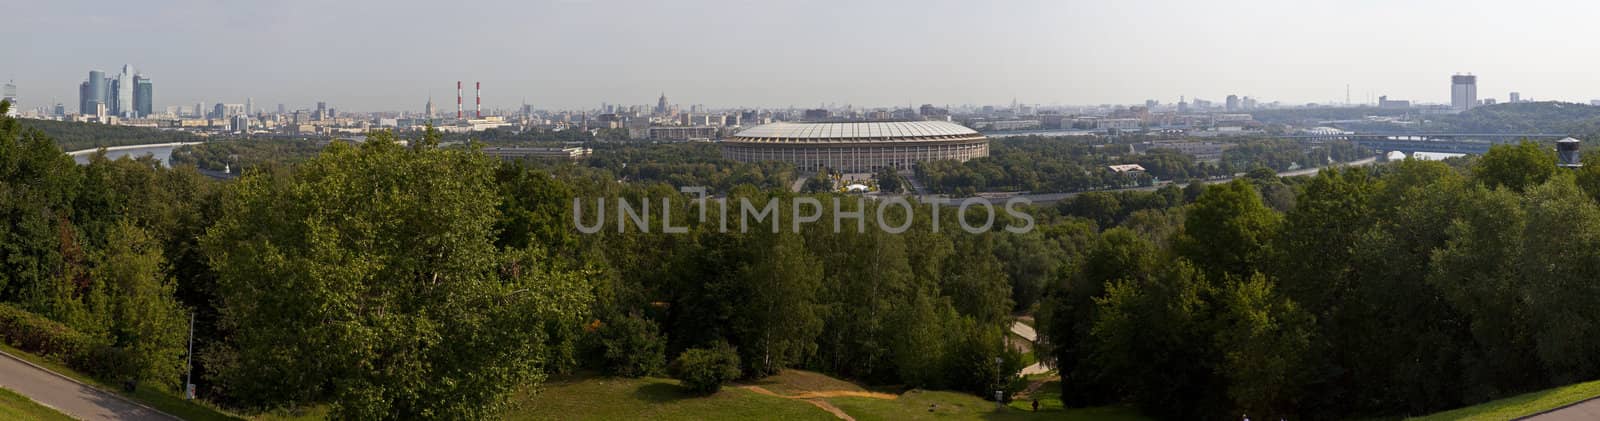 Moscow Panoramic View from Vorobyovy Hills, Russia.